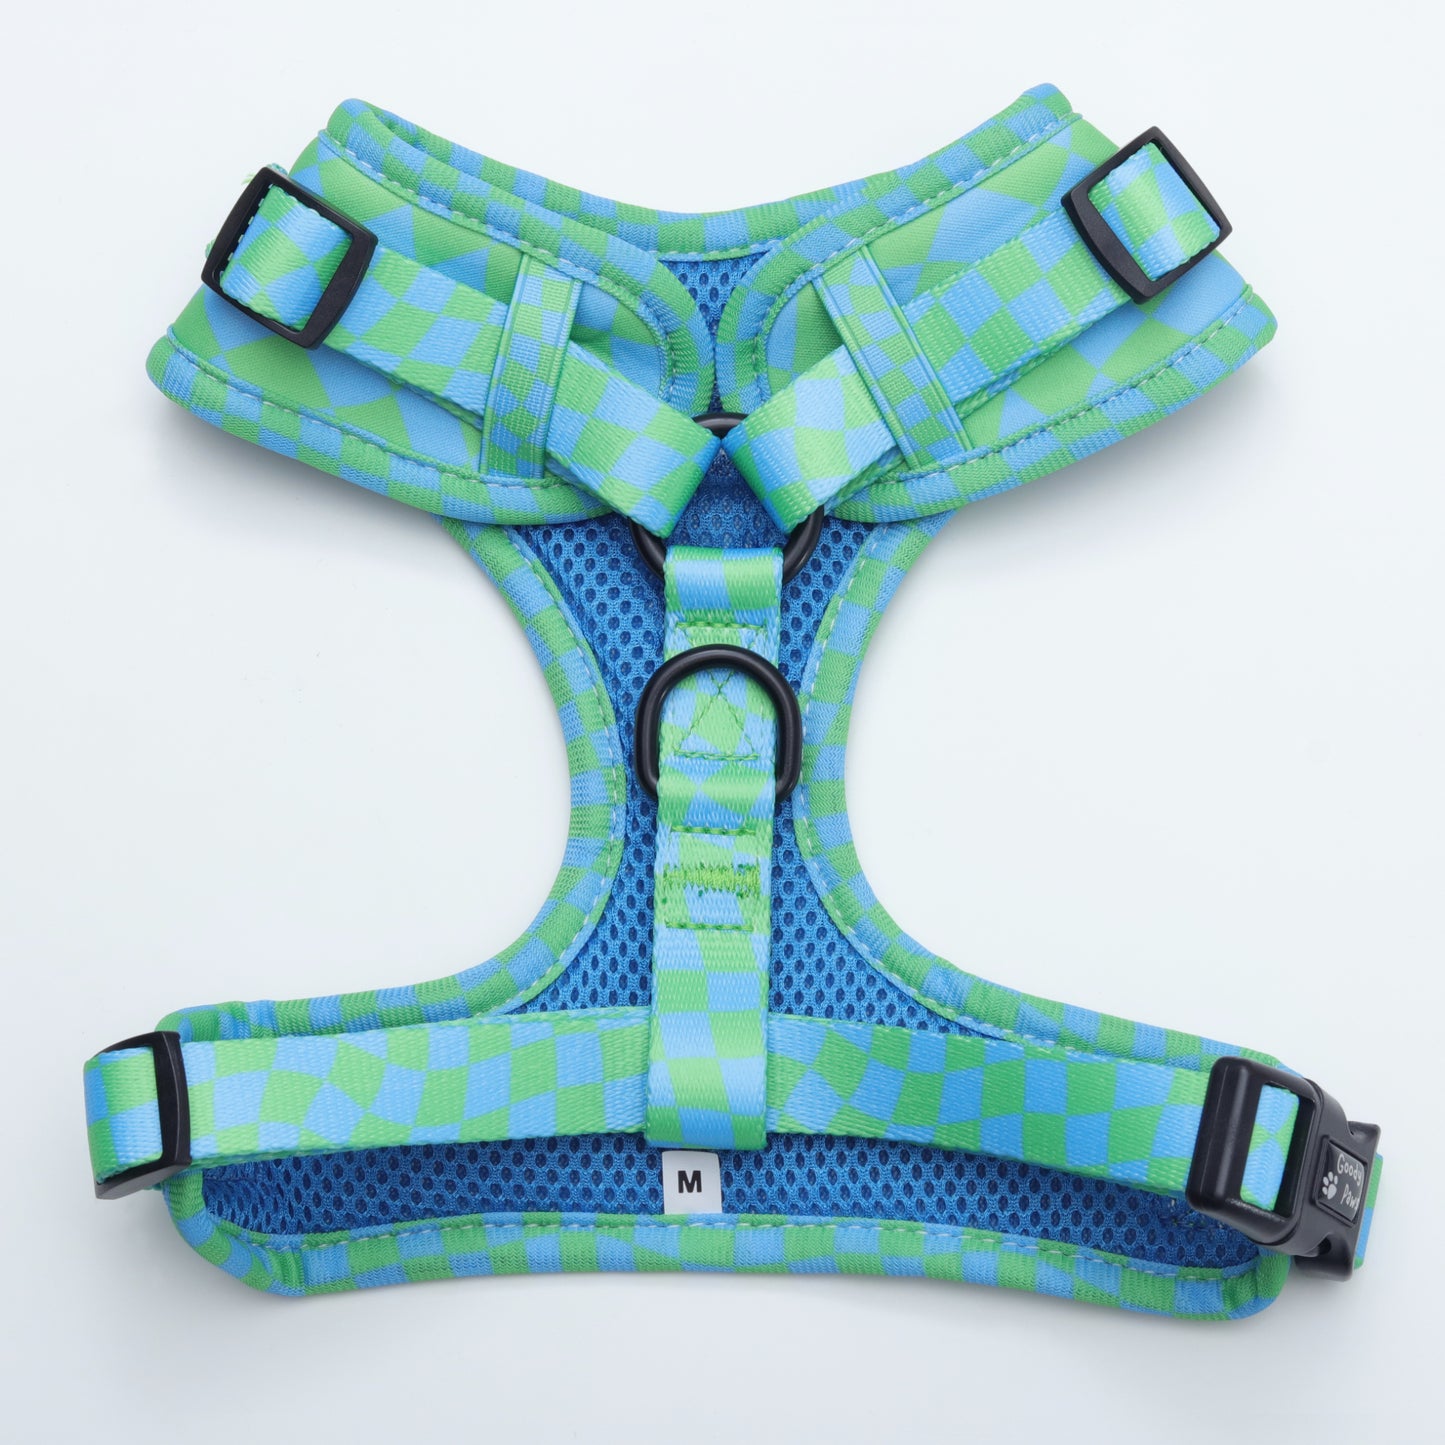 Check Me Out Adjustable Harness